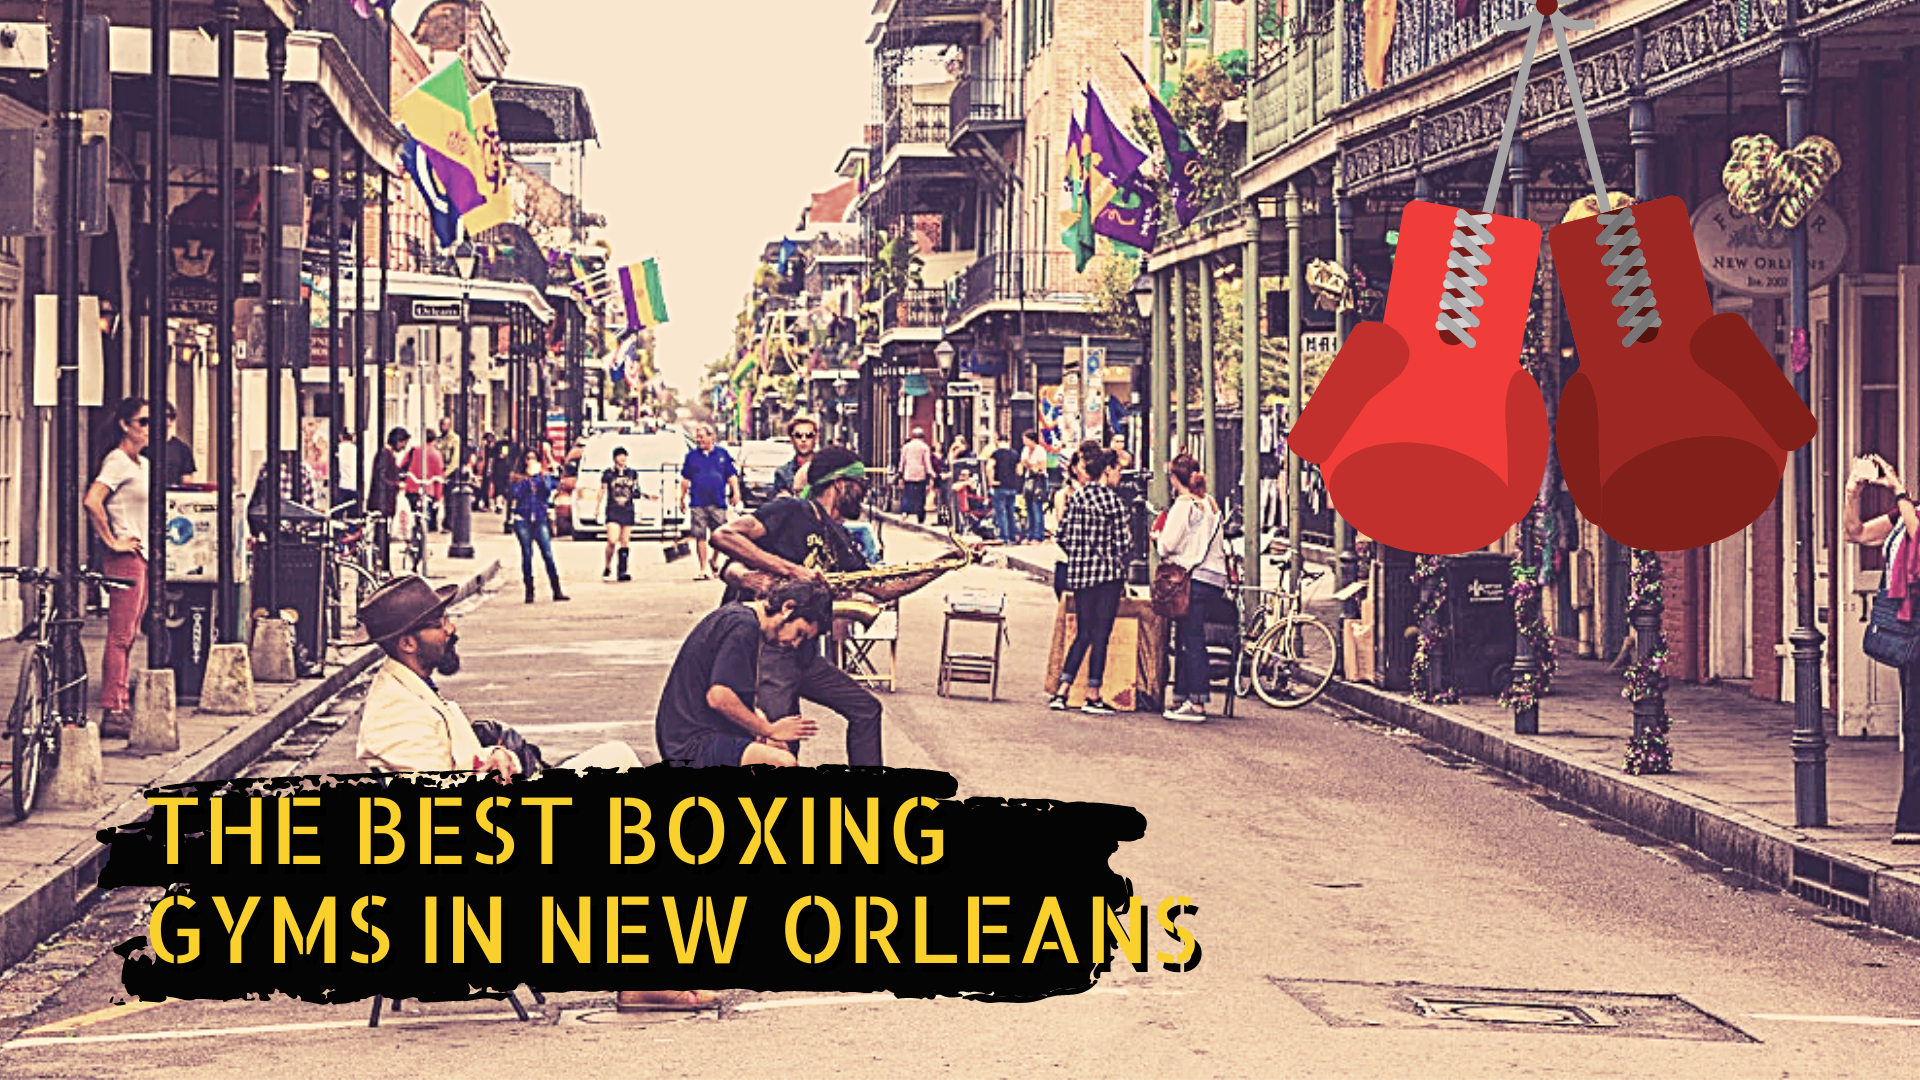 A title image showing boxing gloves and a New Orleans street